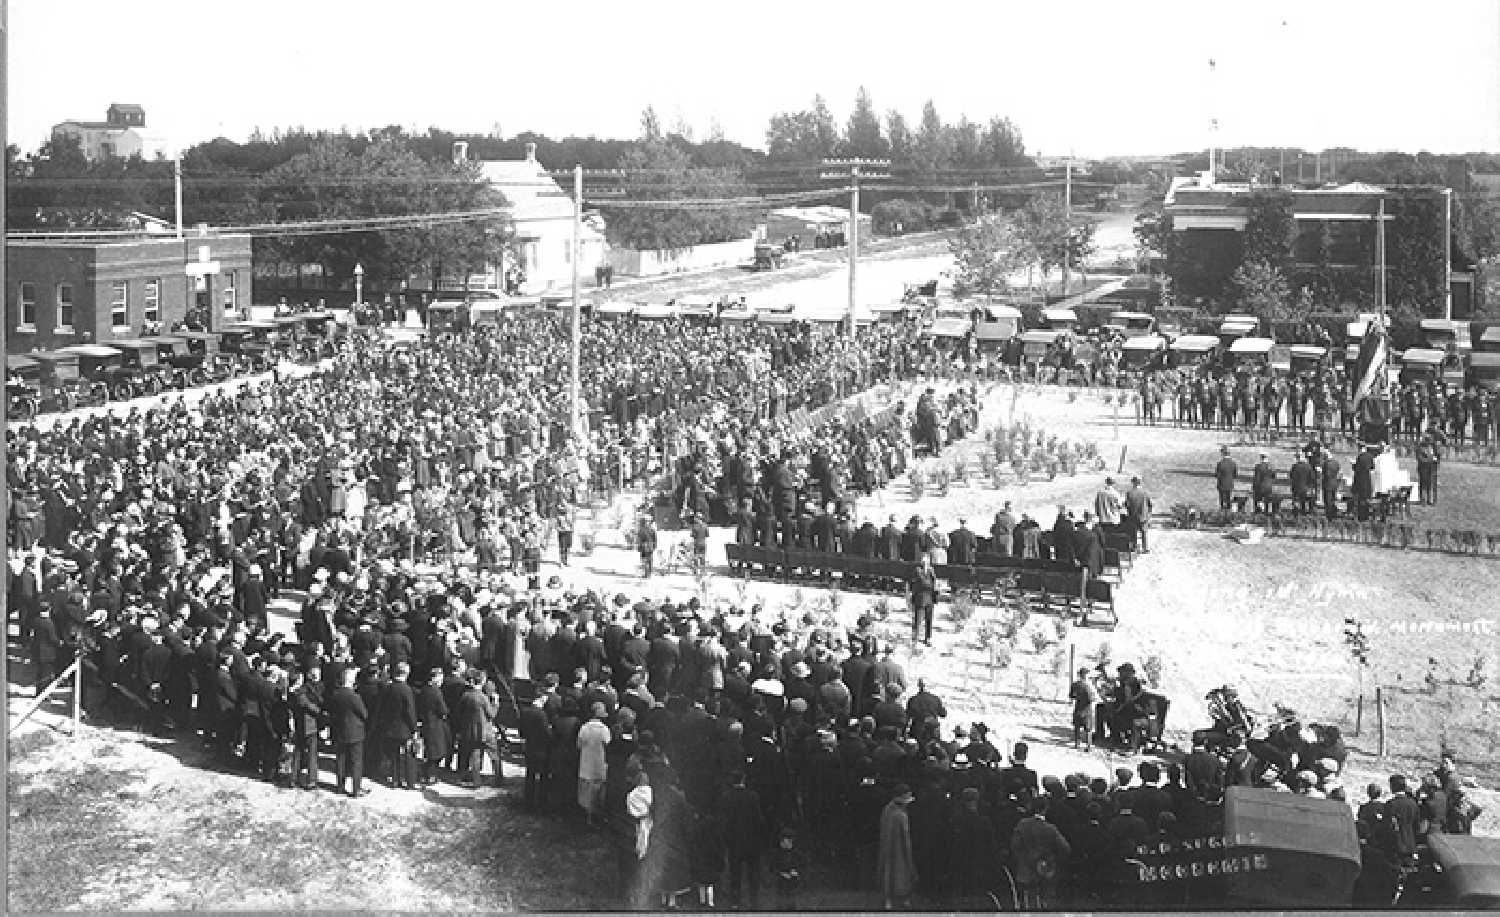 The scene when Moosomins Cenotaph was unveiled in 1924.